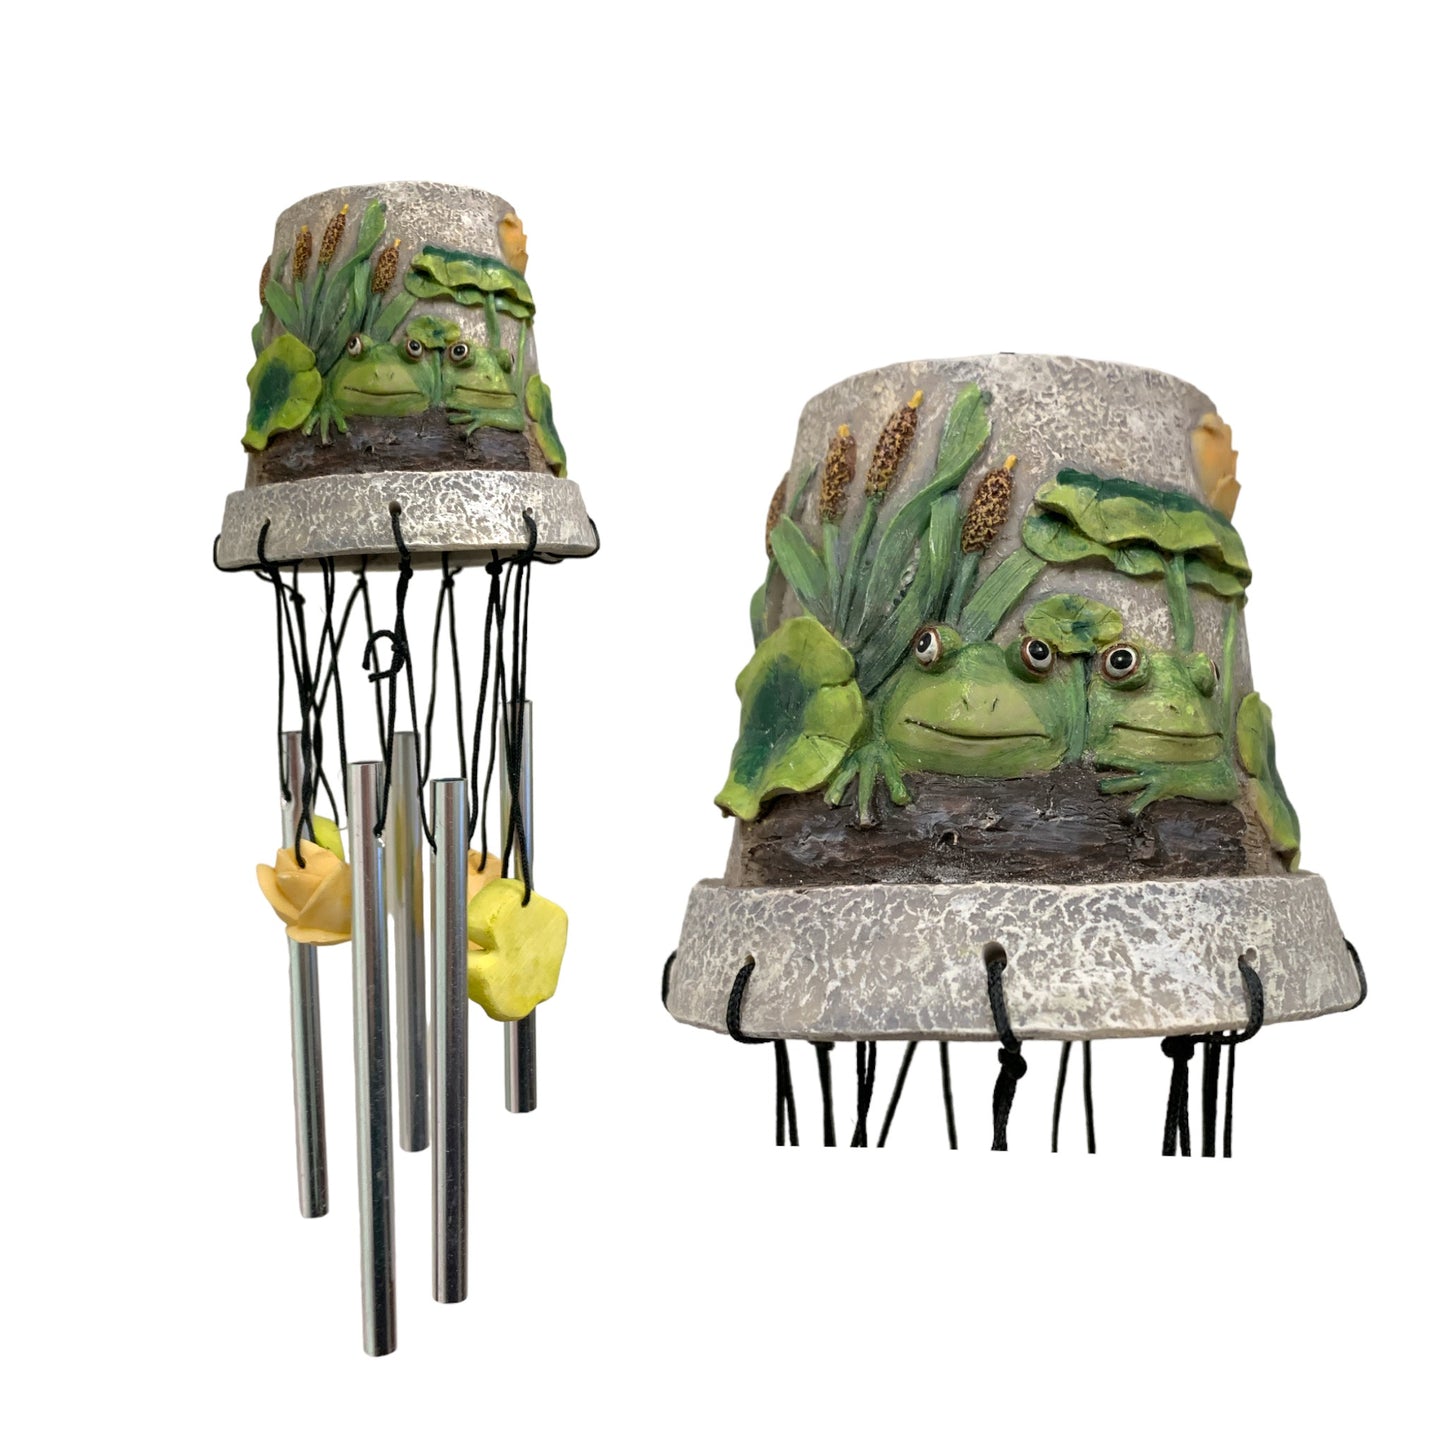 FLOWER POT WIND CHIME - 12 INCH - FROGS AND LILYPADS